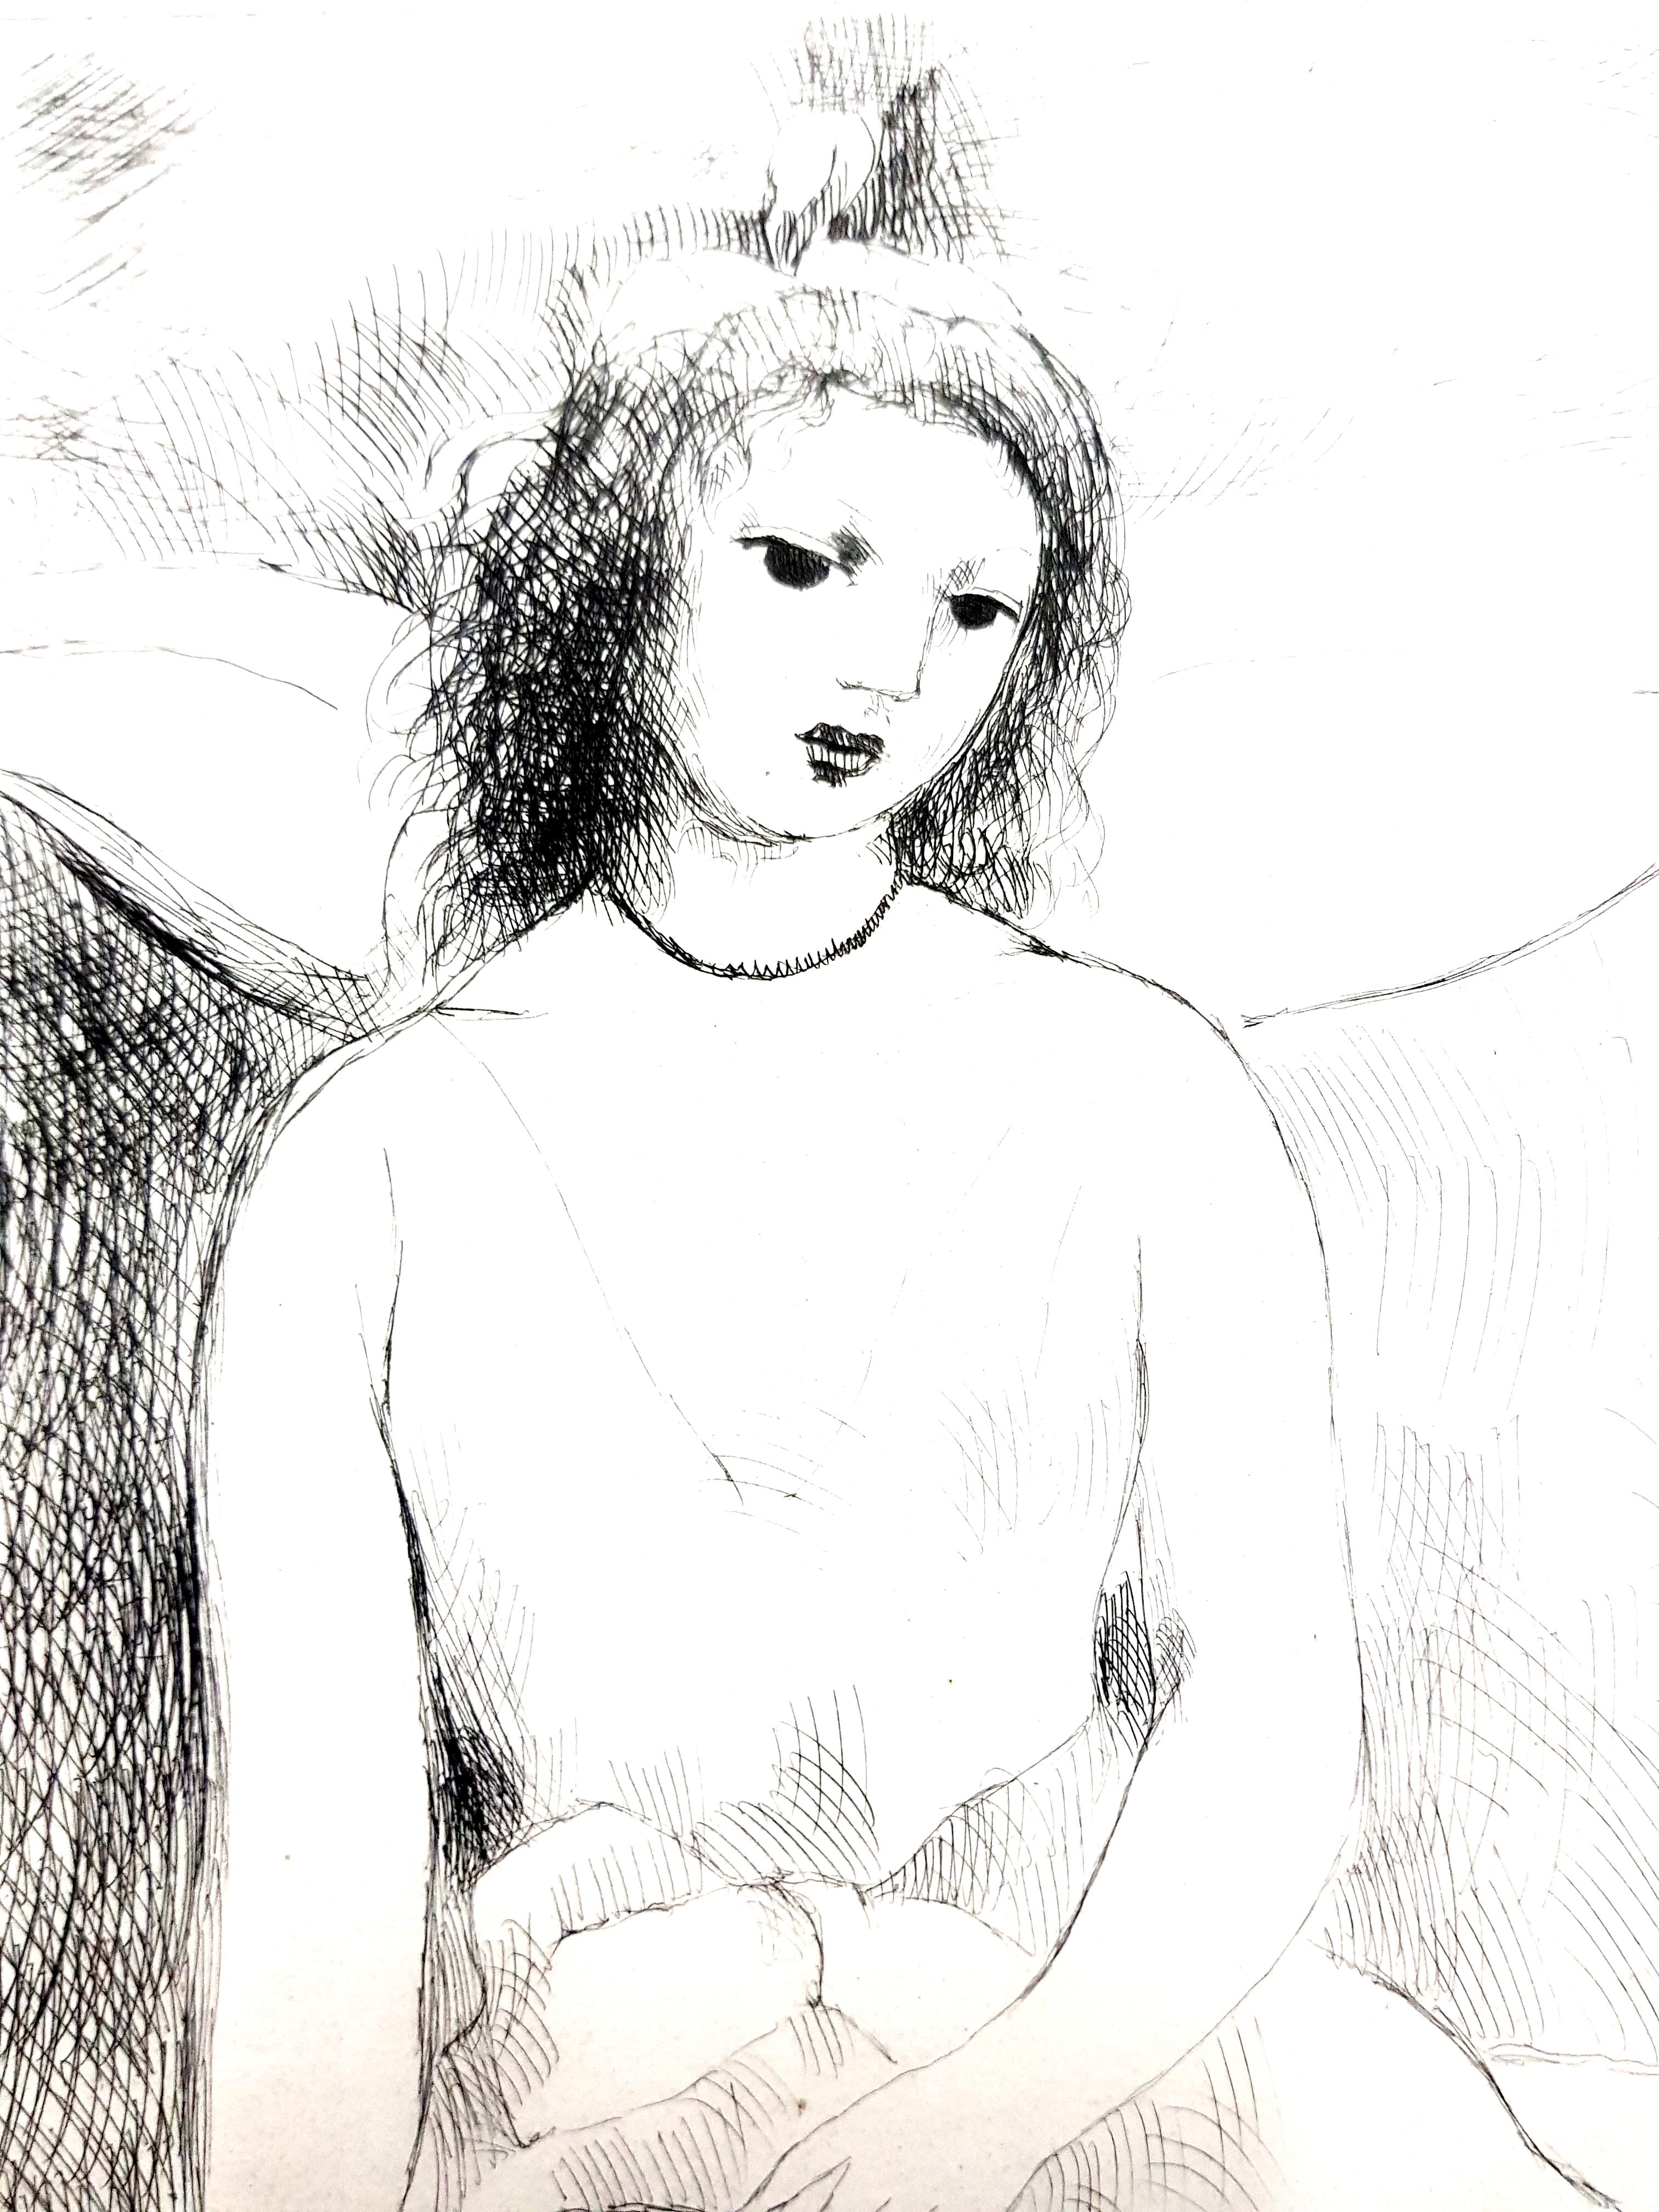 Marie Laurencin - Woman Angel - Original Etching
Paris, Le Gerbier, 1946
Edition of 340
Signed in the plate